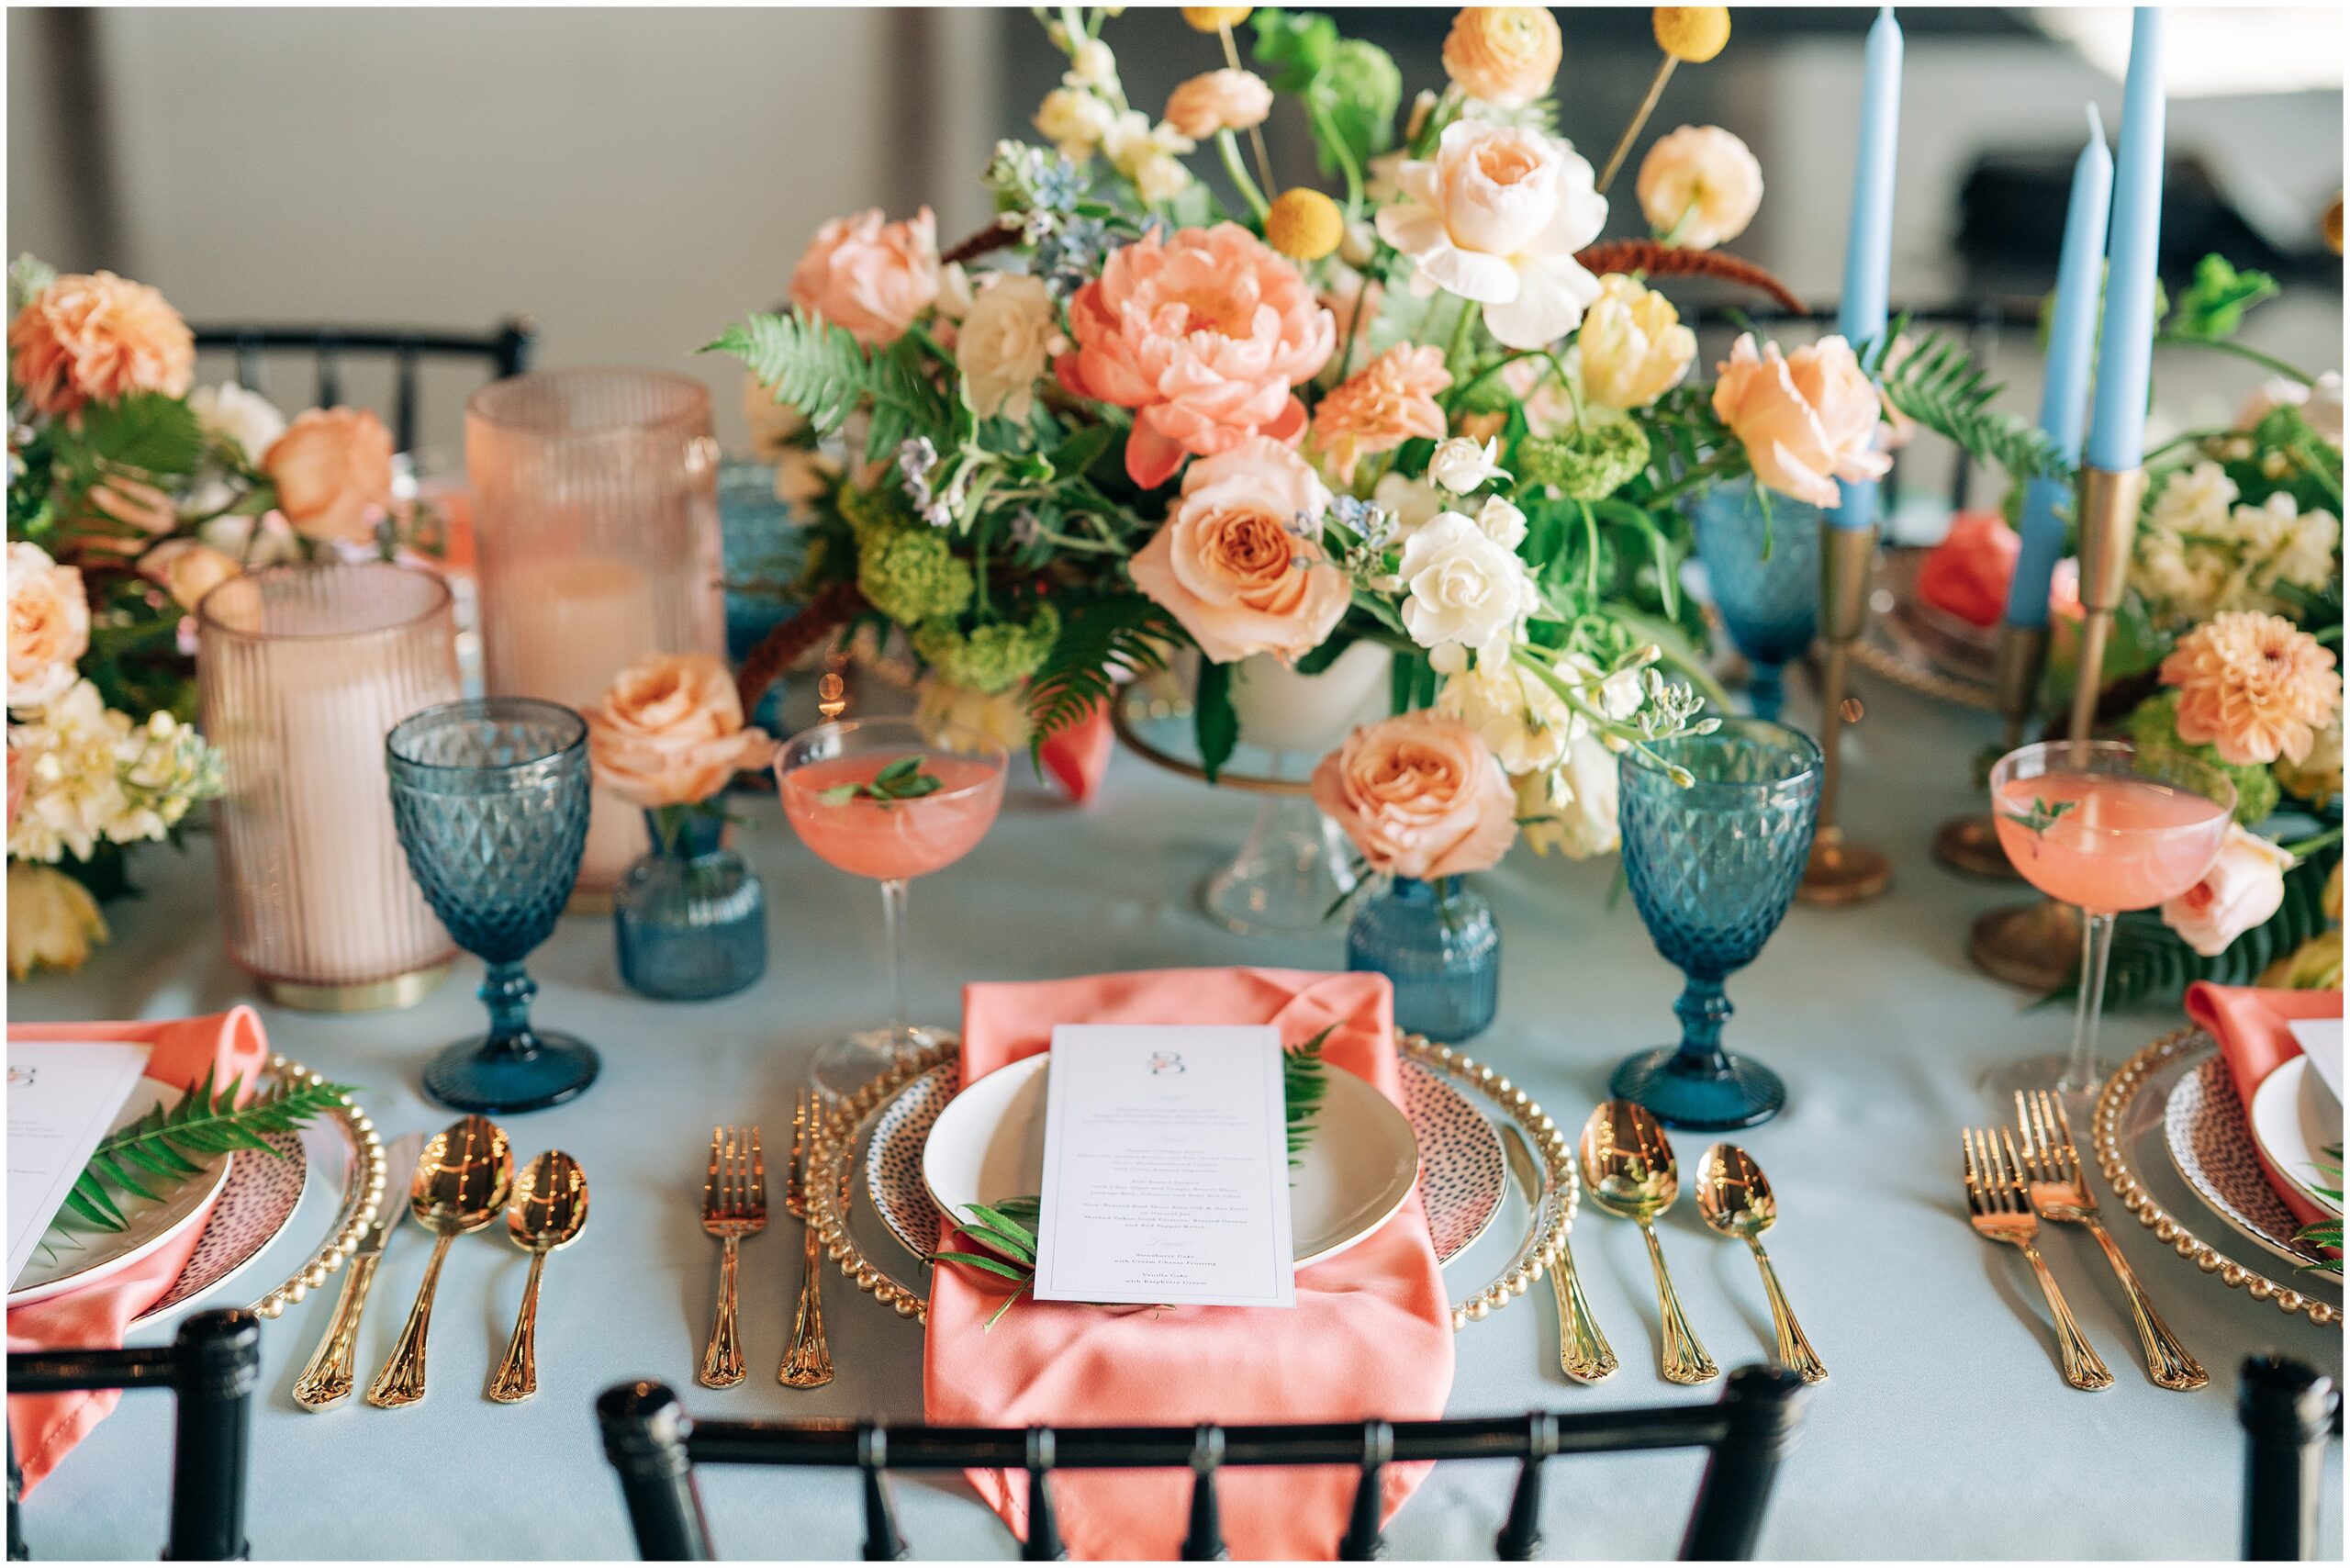 Blue tablecloth, gold silverware, peach napkins, and peach yellow dusty blue and greenery bouquet by Lavish Floral Design set up by White Linen Planning. Photo by Anna Brace an Omaha wedding photographer.